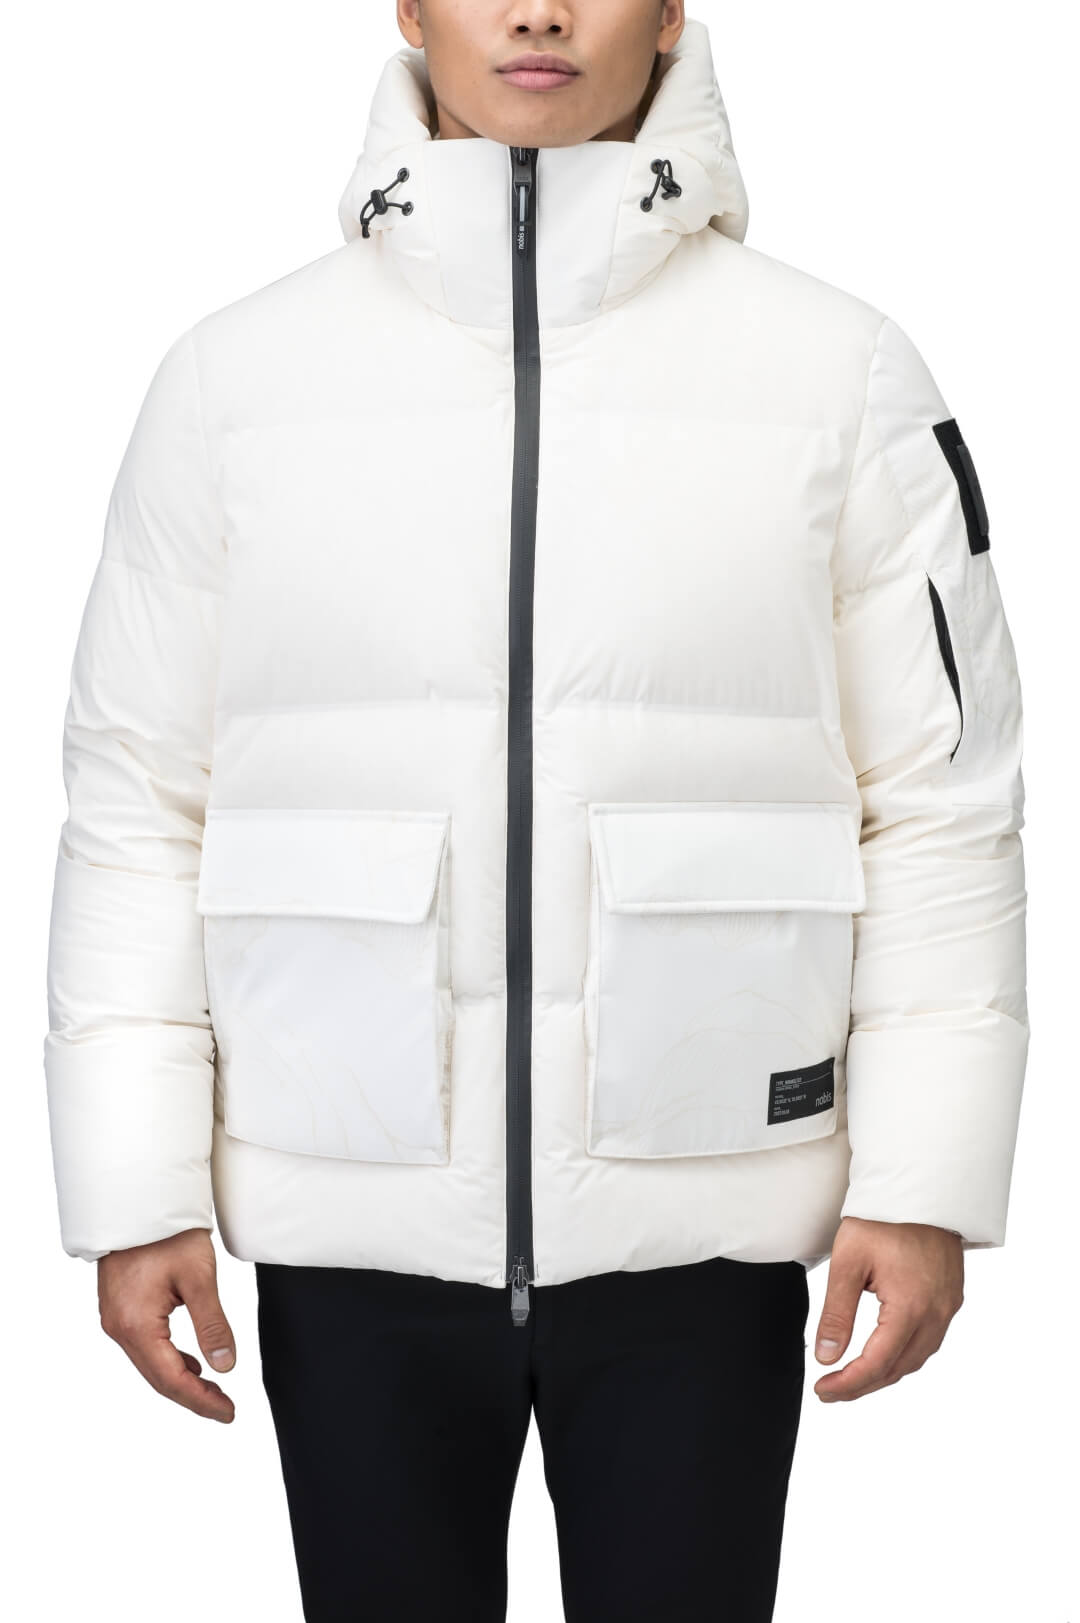 Supra Men's Performance Puffer in hip length, Technical Taffeta and 3-Ply Micro Denier fabrication, Premium Canadian White Duck Down insulation, non-removable down filled hood, centre front two-way zipper, flap pockets at waist, and zipper pocket at left bicep, in Wheat Desert